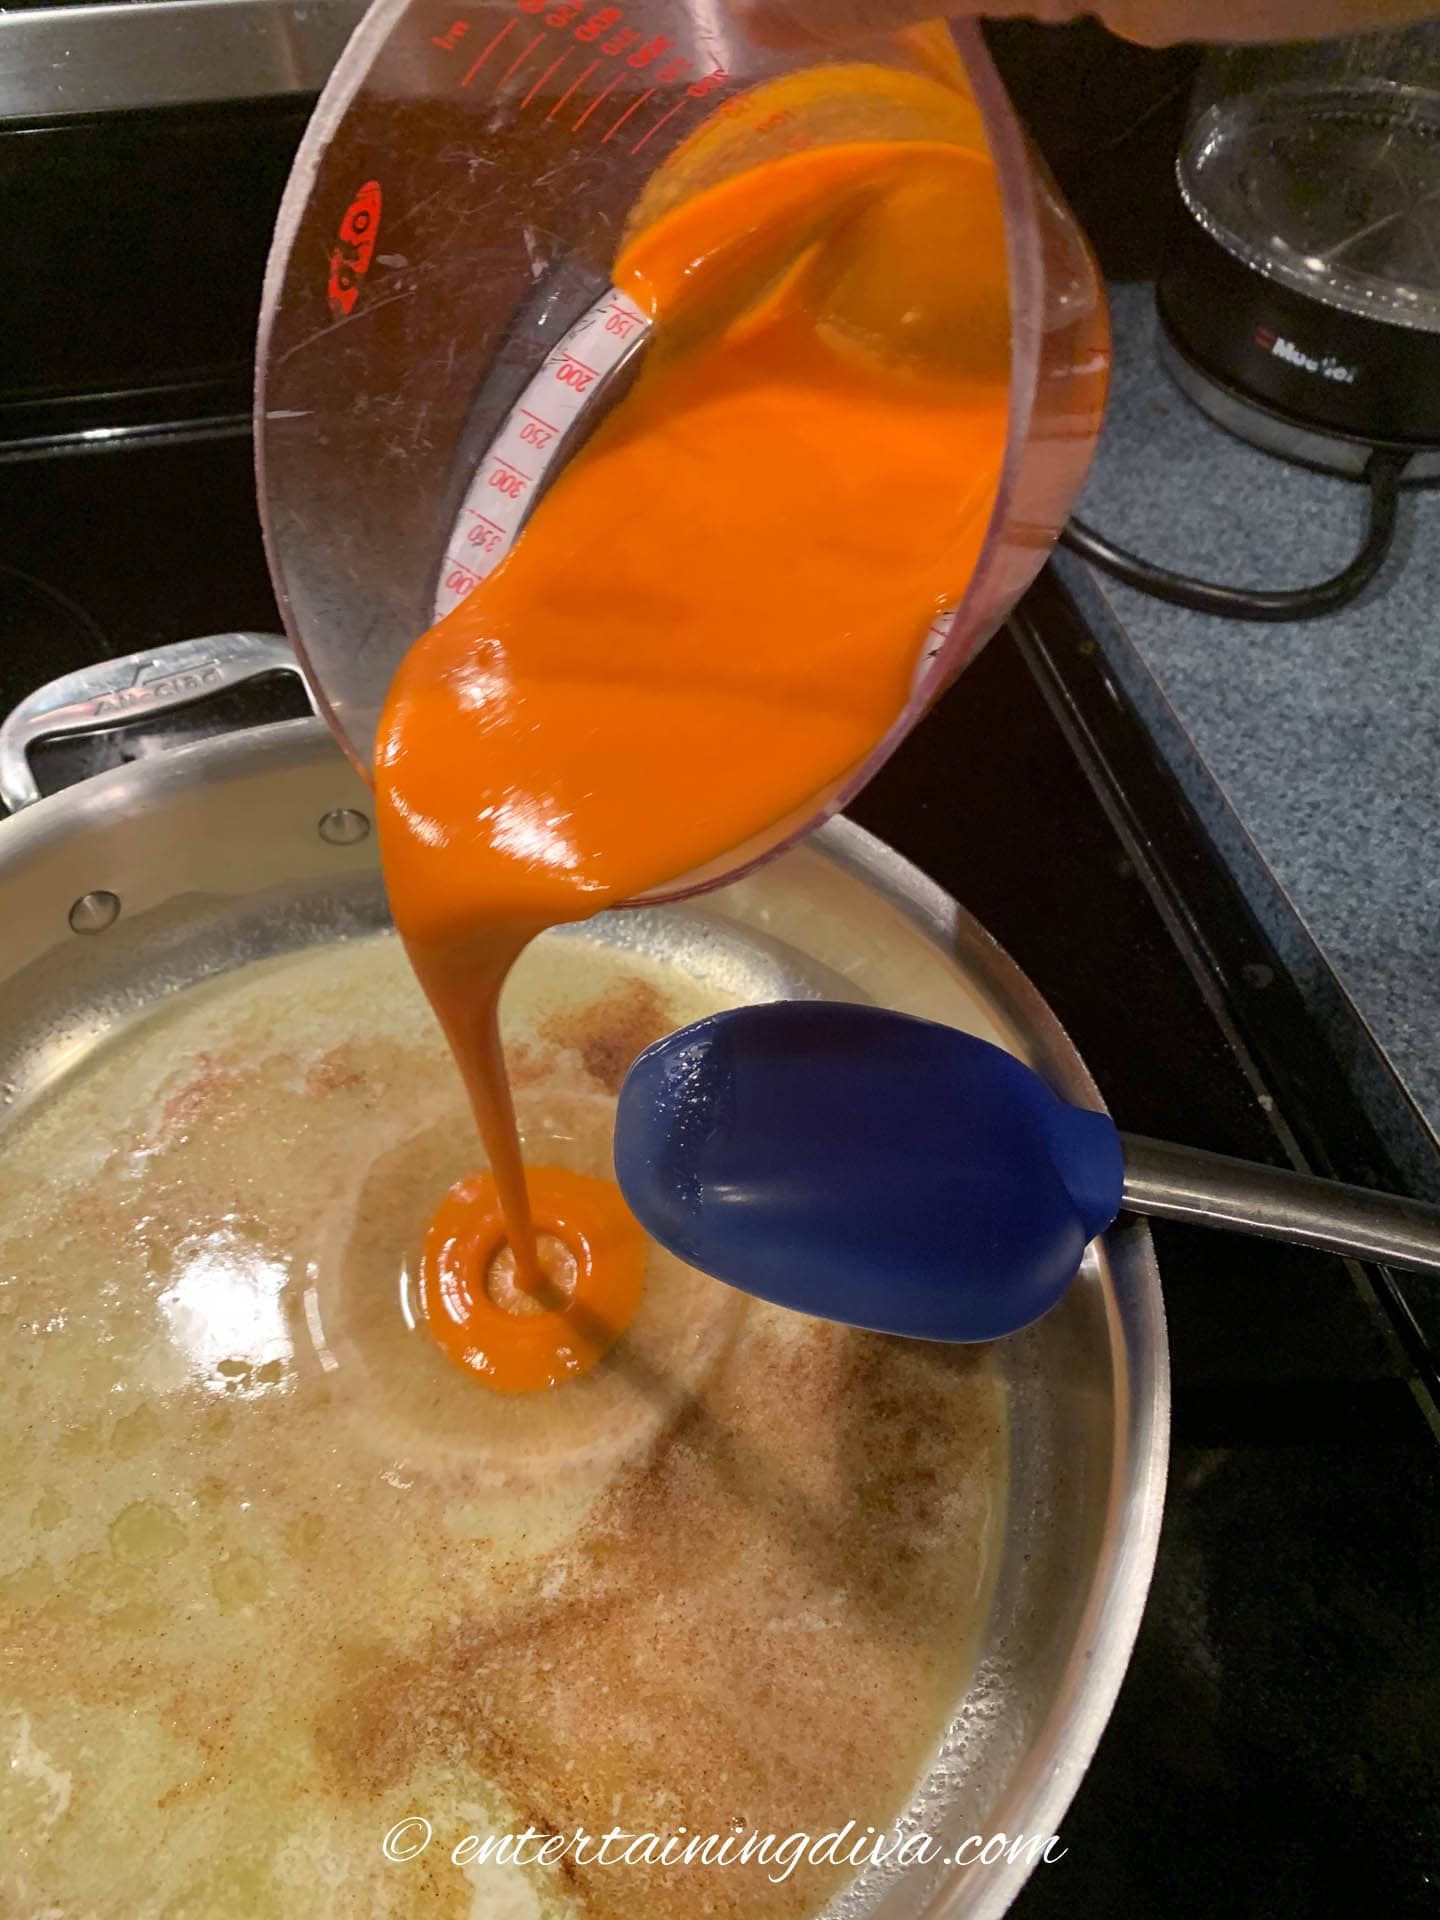 Frank's buffalo sauce being added to the melted butter